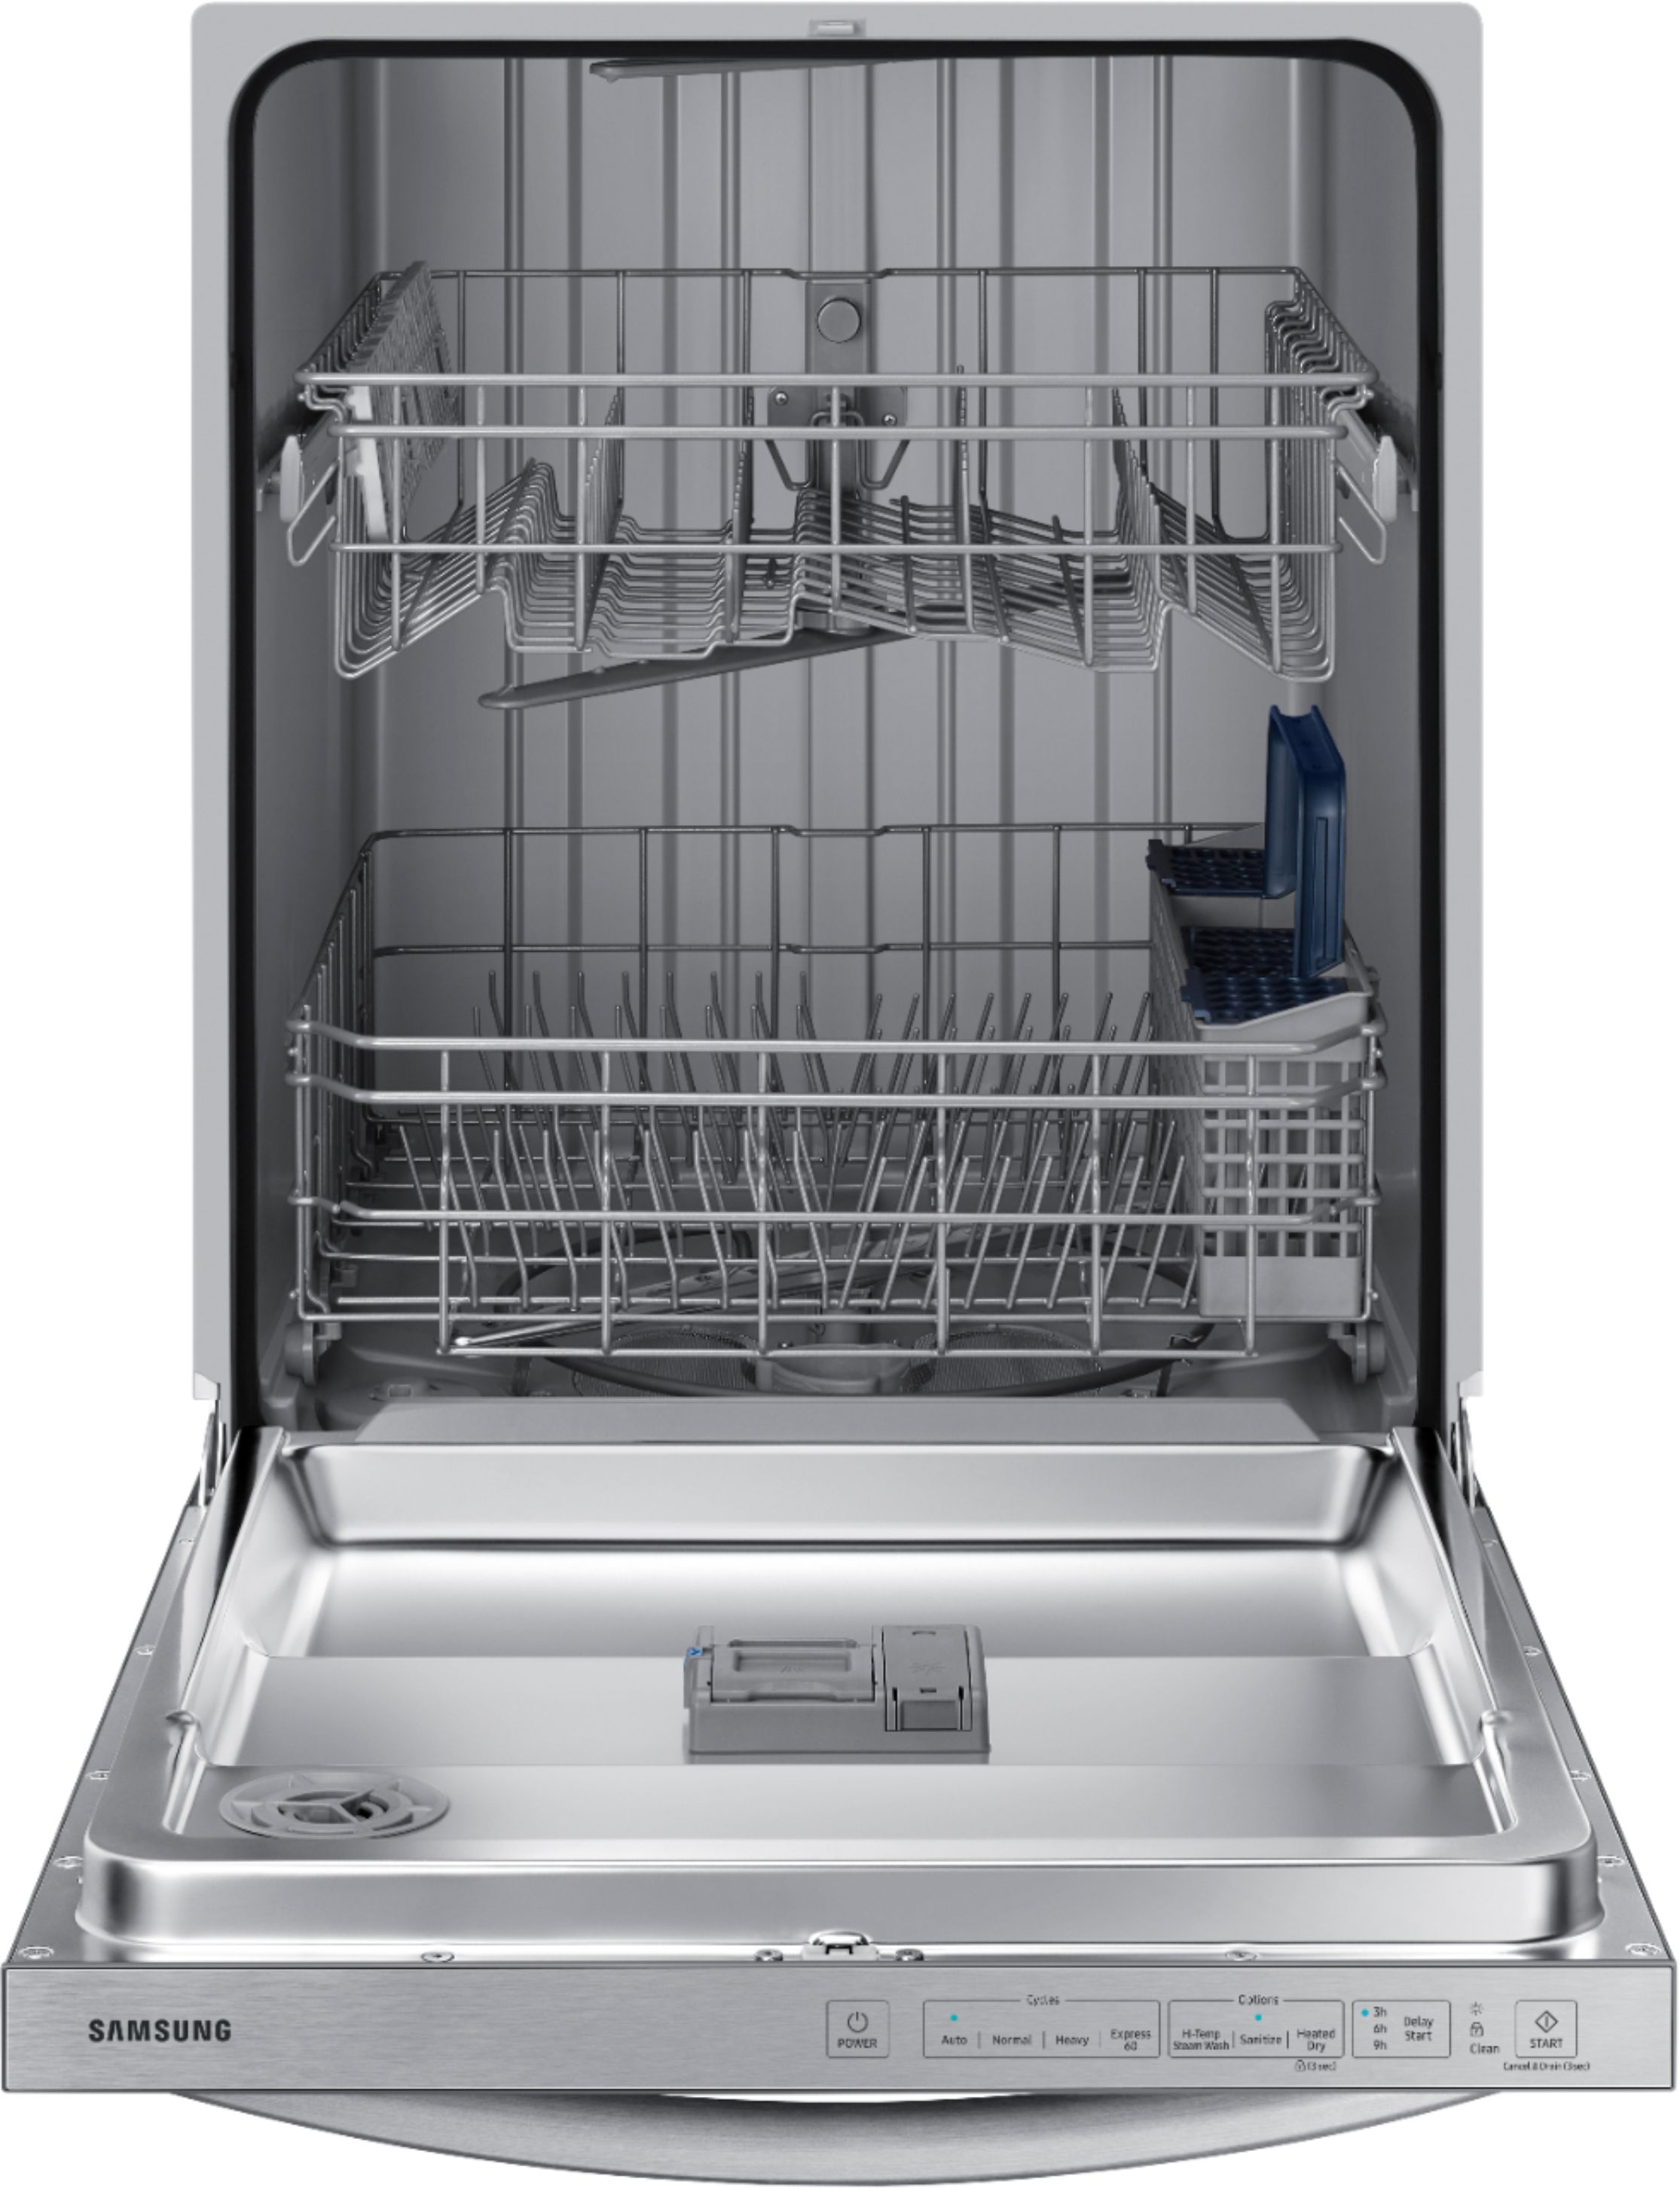 Samsung DW80R2031US 24 Inch Fully Integrated Dishwasher With 14 Place ...